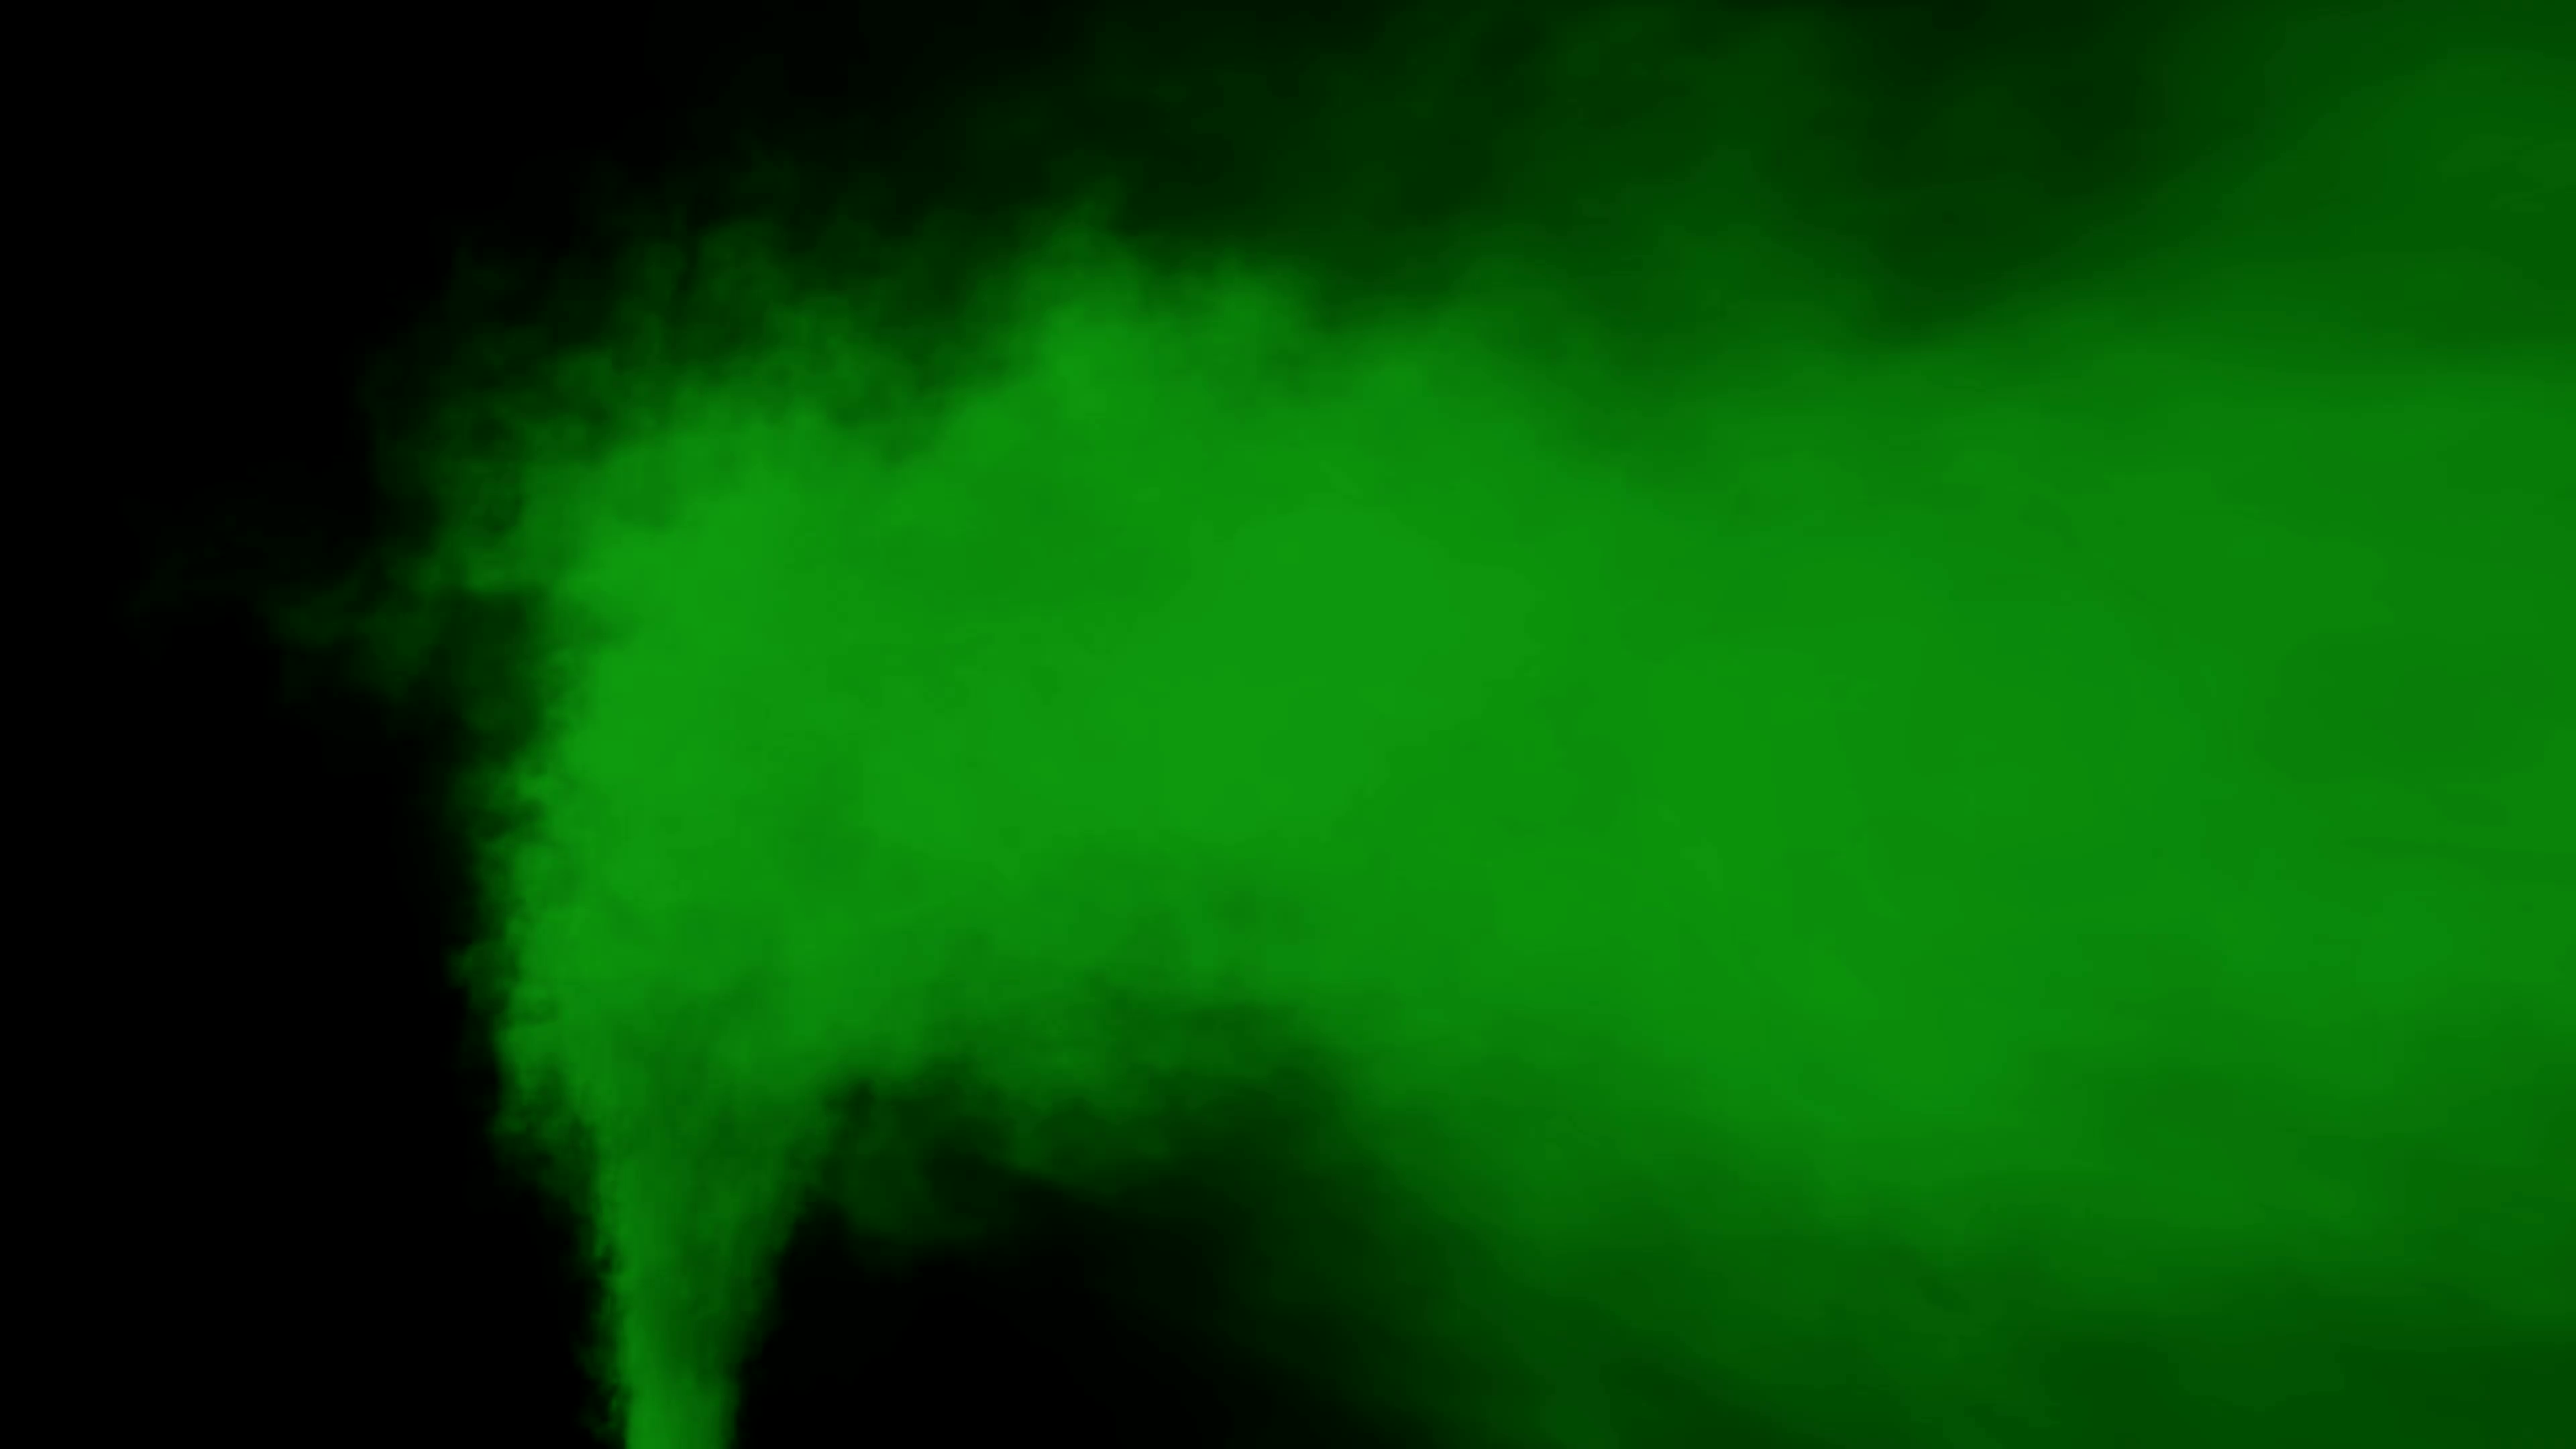 Animated stream of green smoke or toxic gas drifting to the right